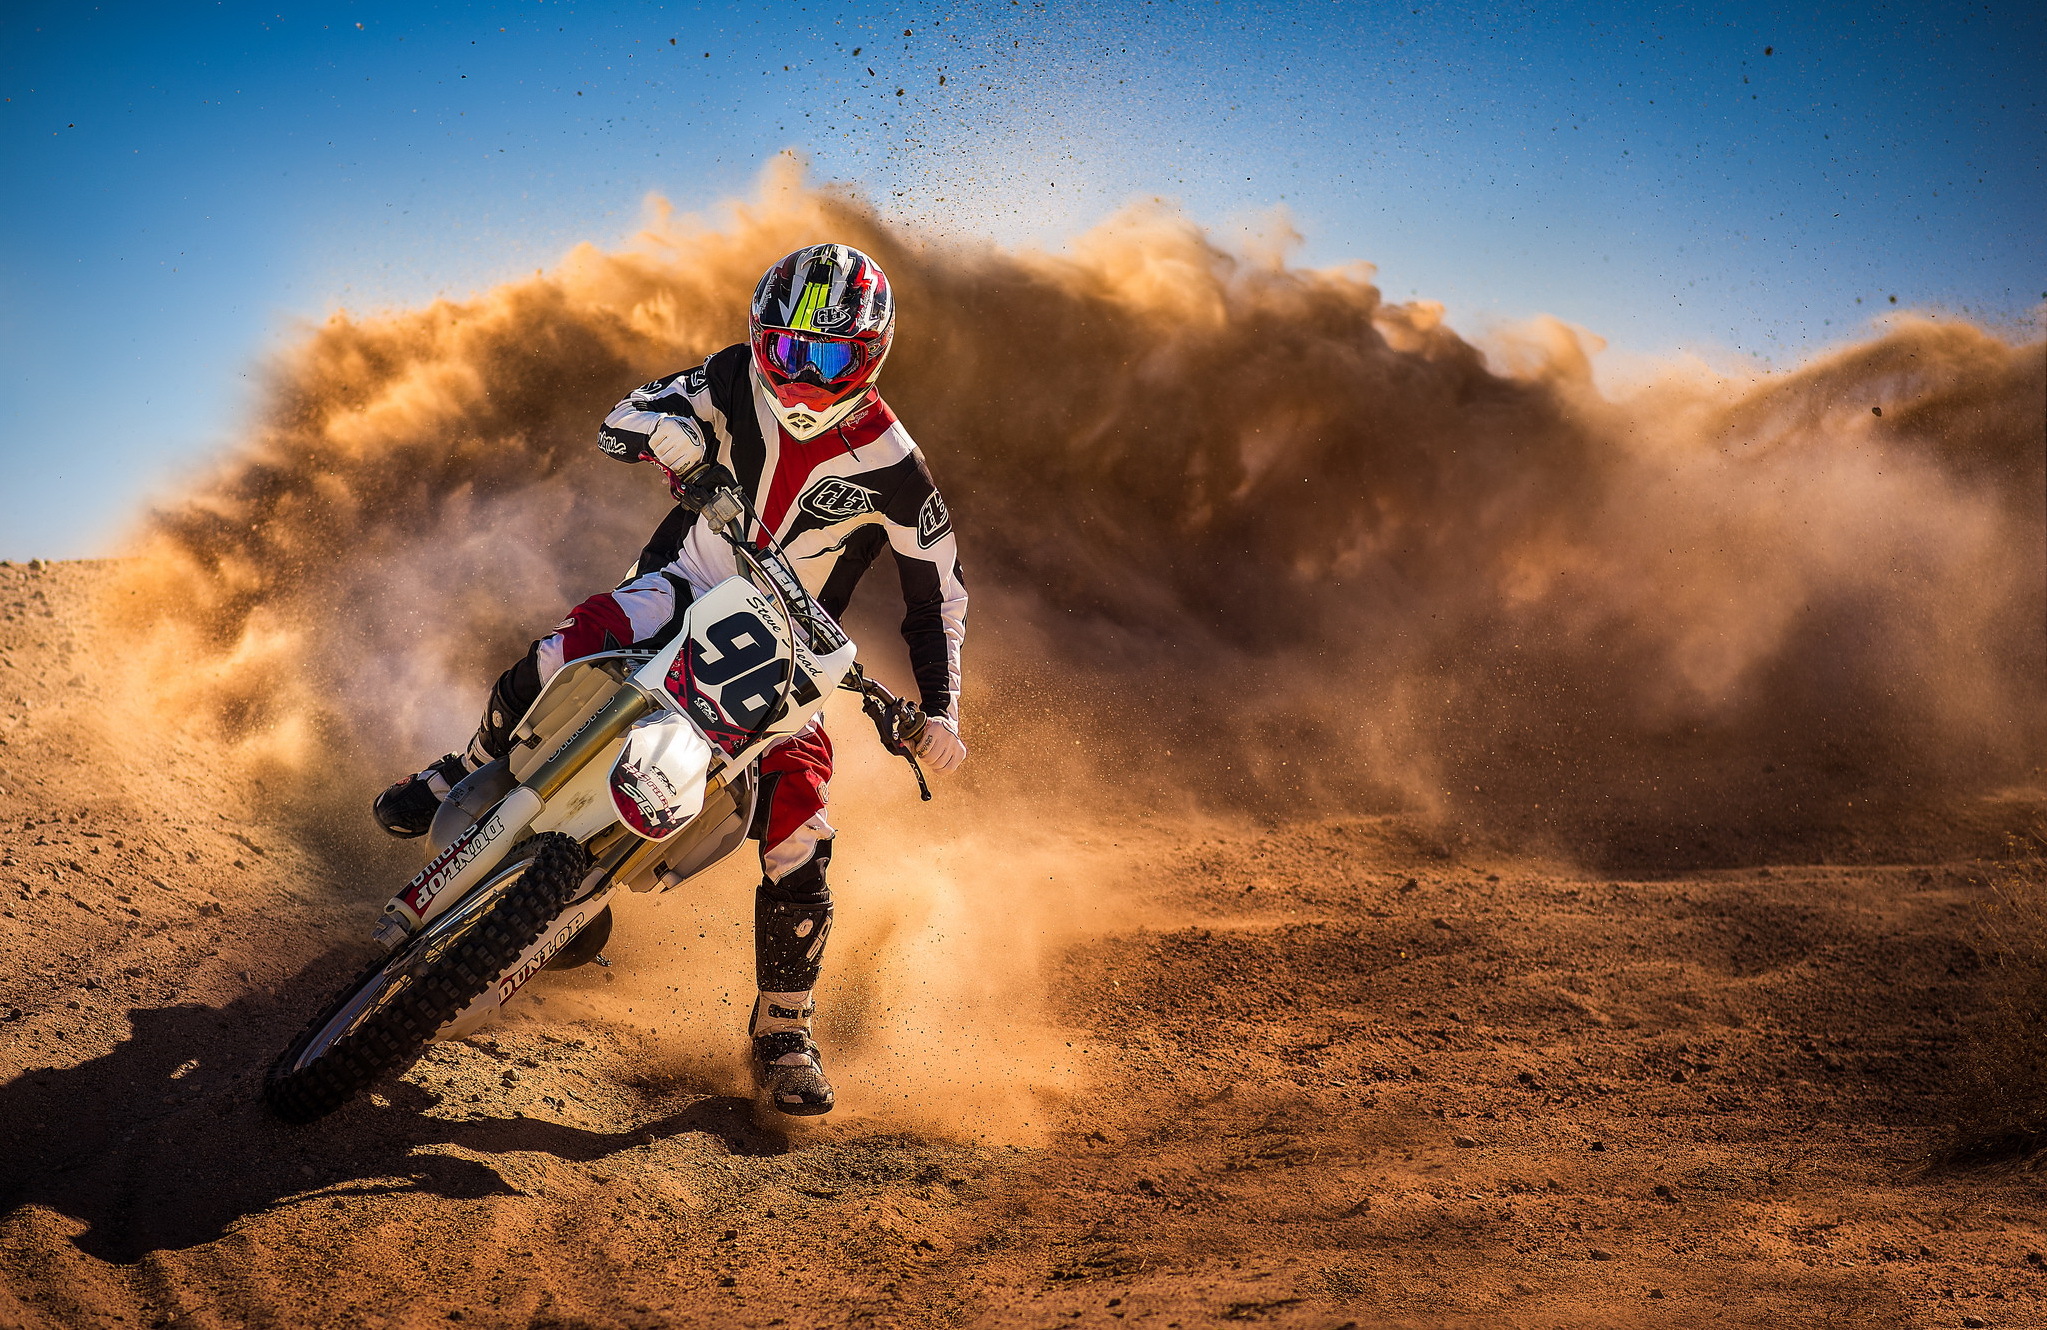 Download background motorcycle, motorcycles, sports, motorcyclist, dust, race